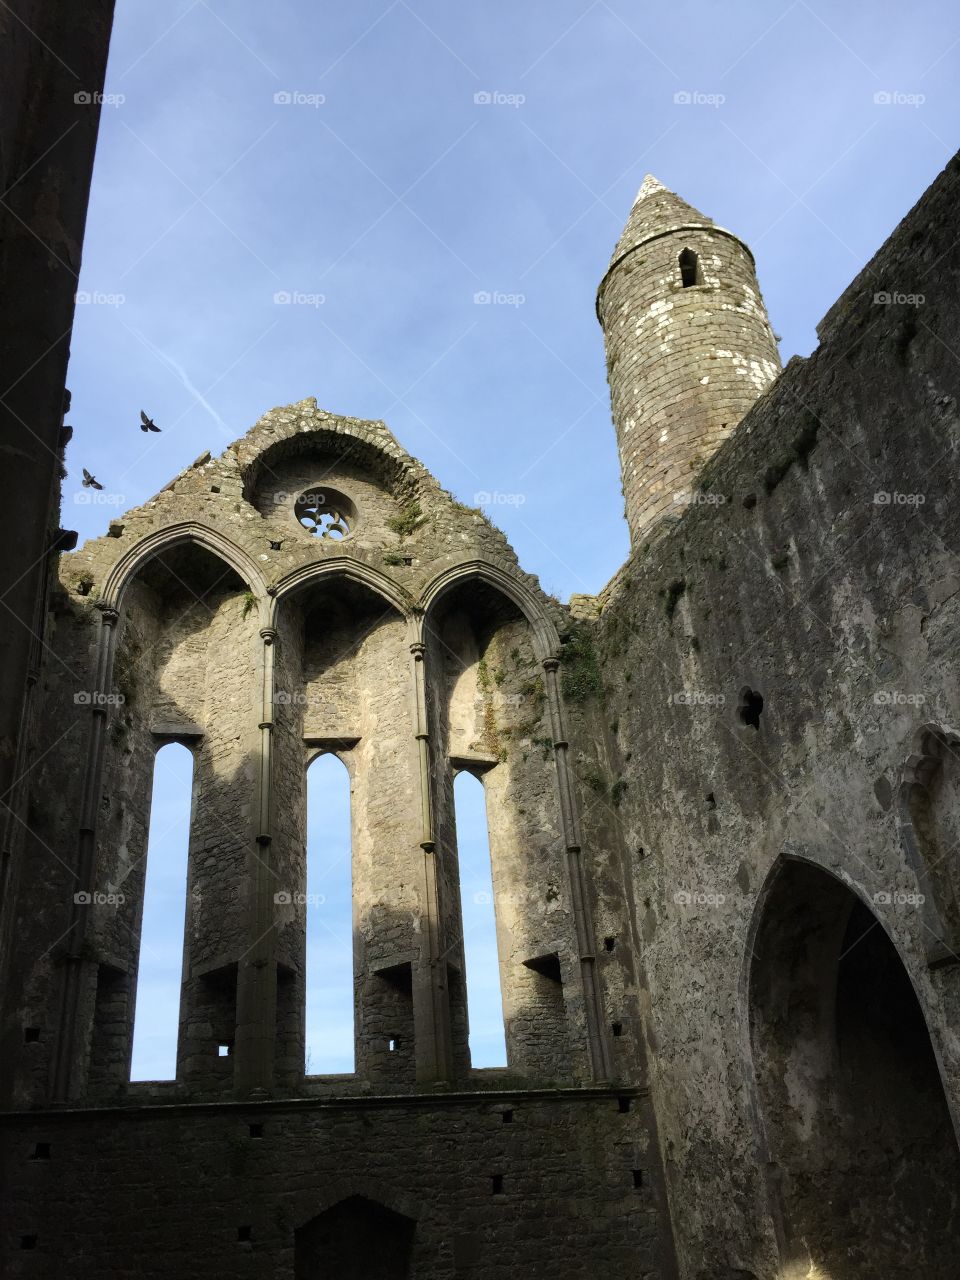 Cathedral, Ireland 